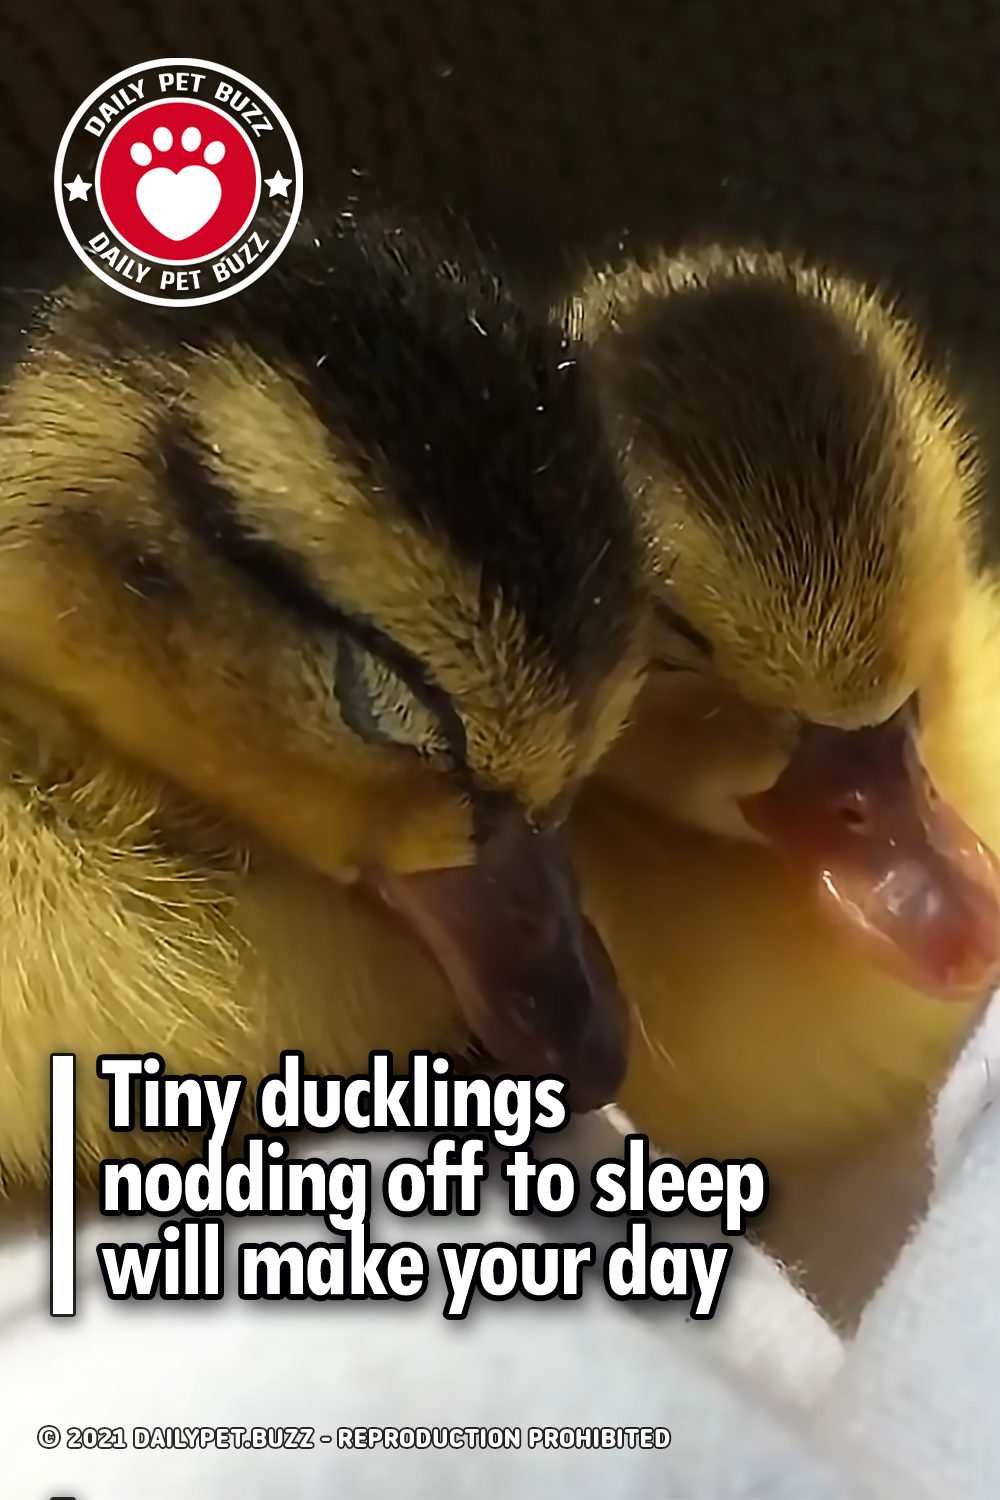 Tiny ducklings nodding off to sleep will make your day